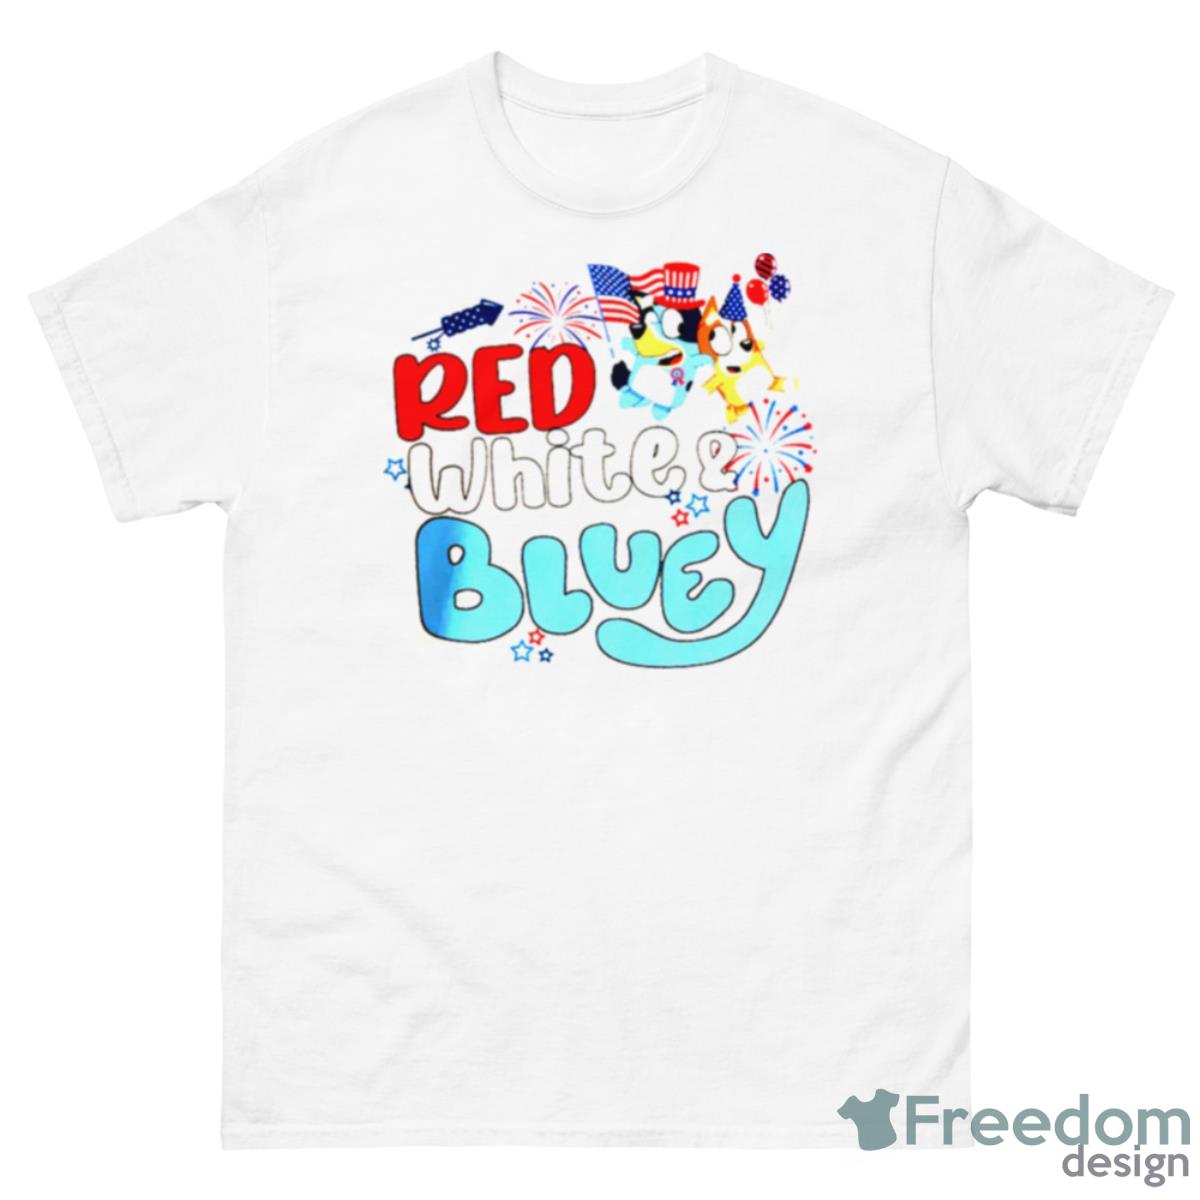 Red White Bluey And Bingo 4th July Independence Day Shirt - 500 Men’s Classic Tee Gildan